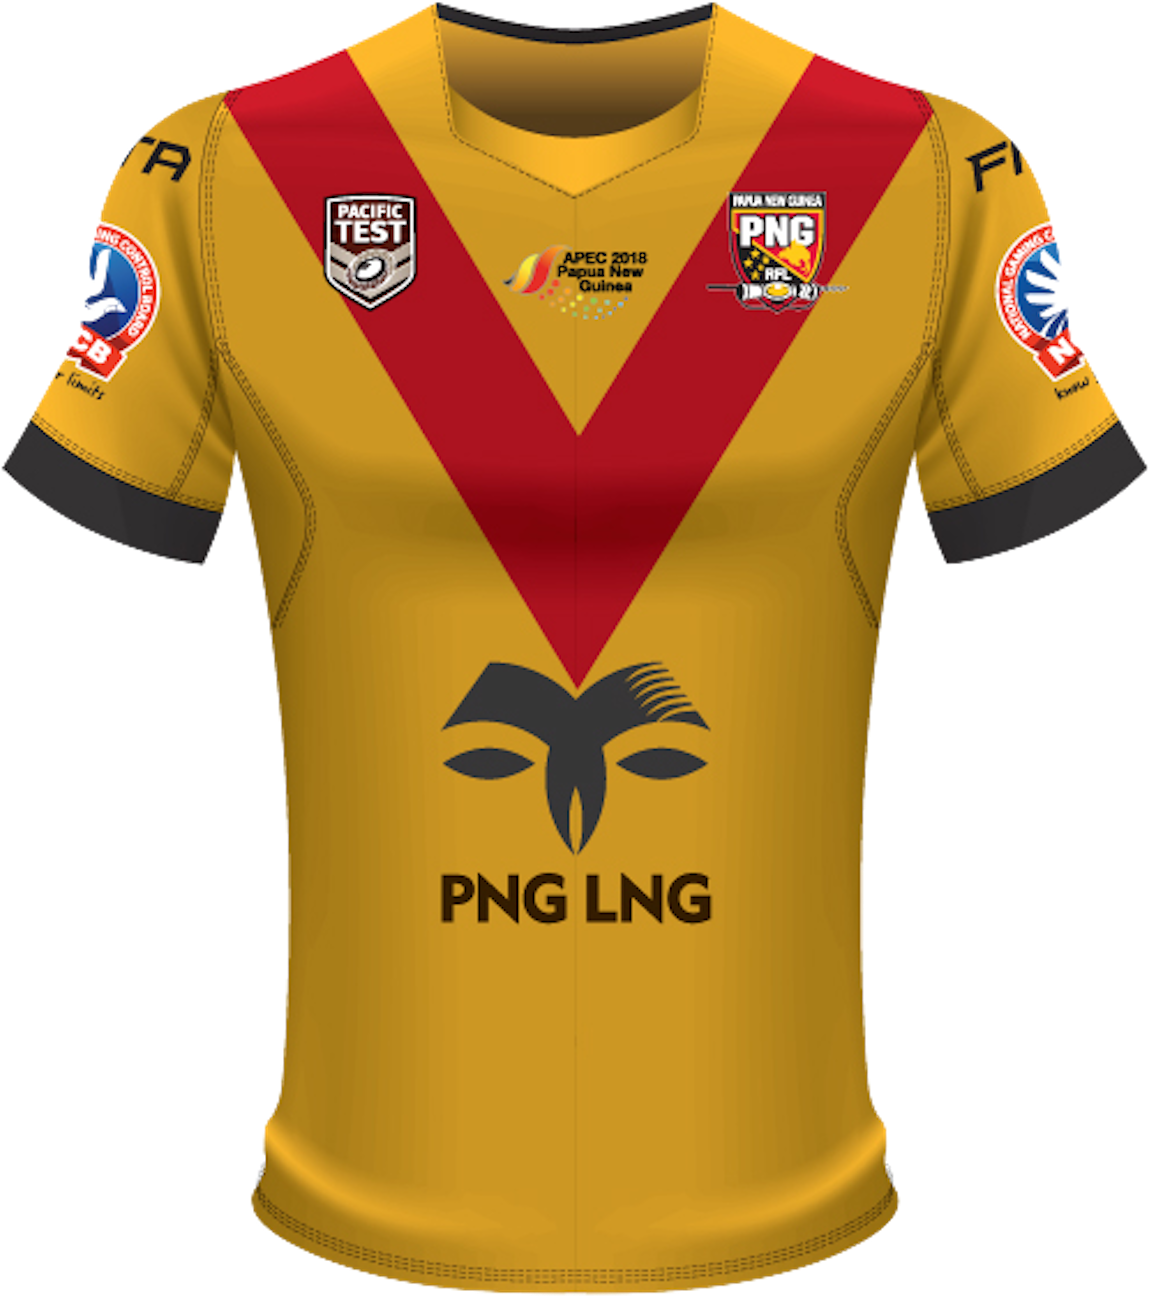 Rugby League Jersey 2018 - Free Transparent PNG Download - PNGkey